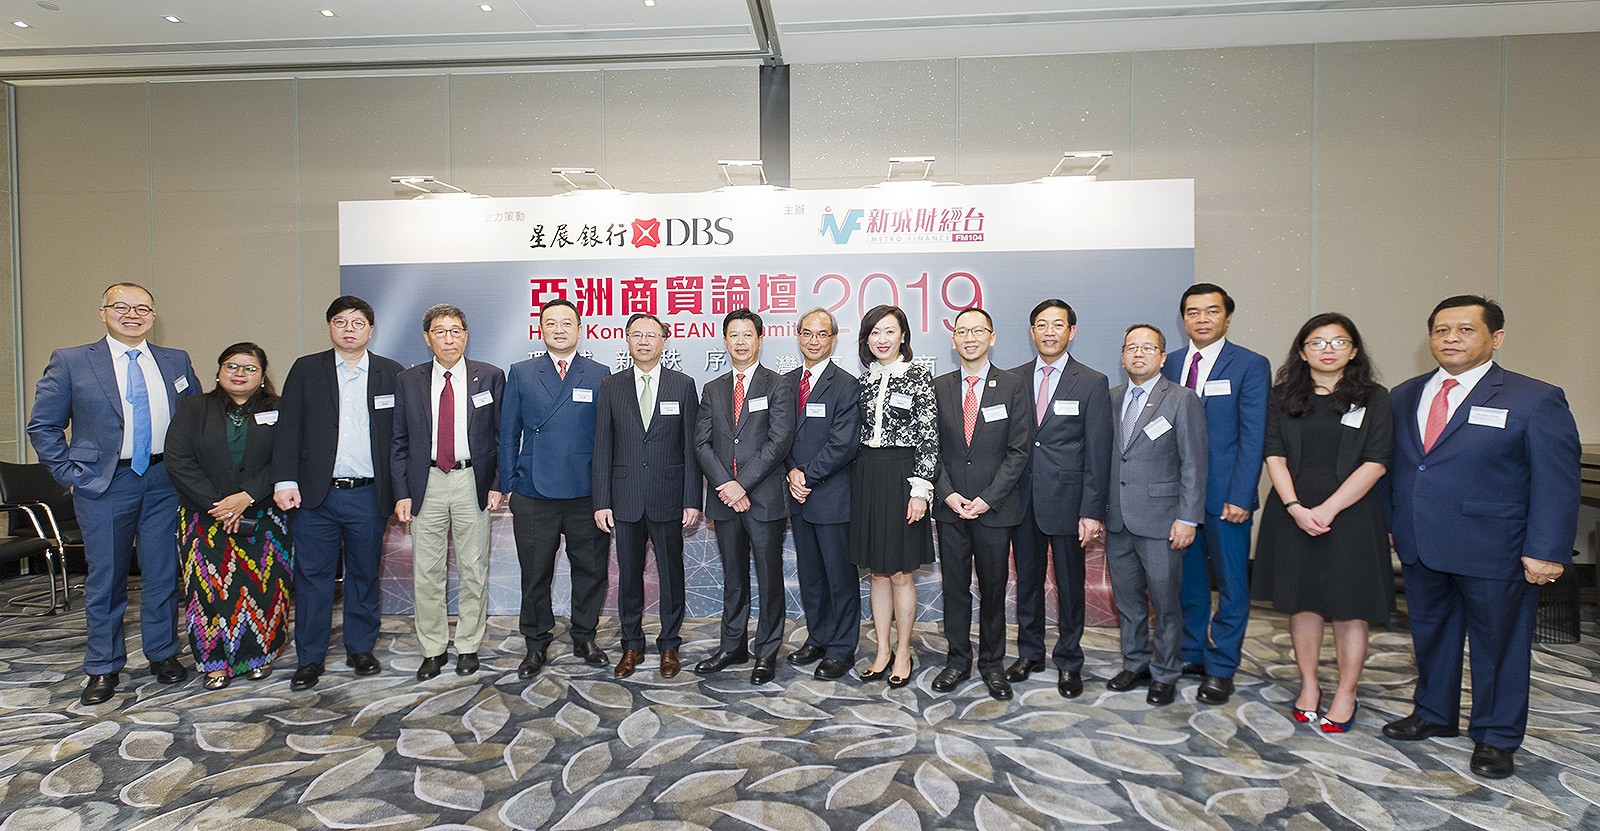 Professor Kuo (4th from left) and other guests of the Summit.